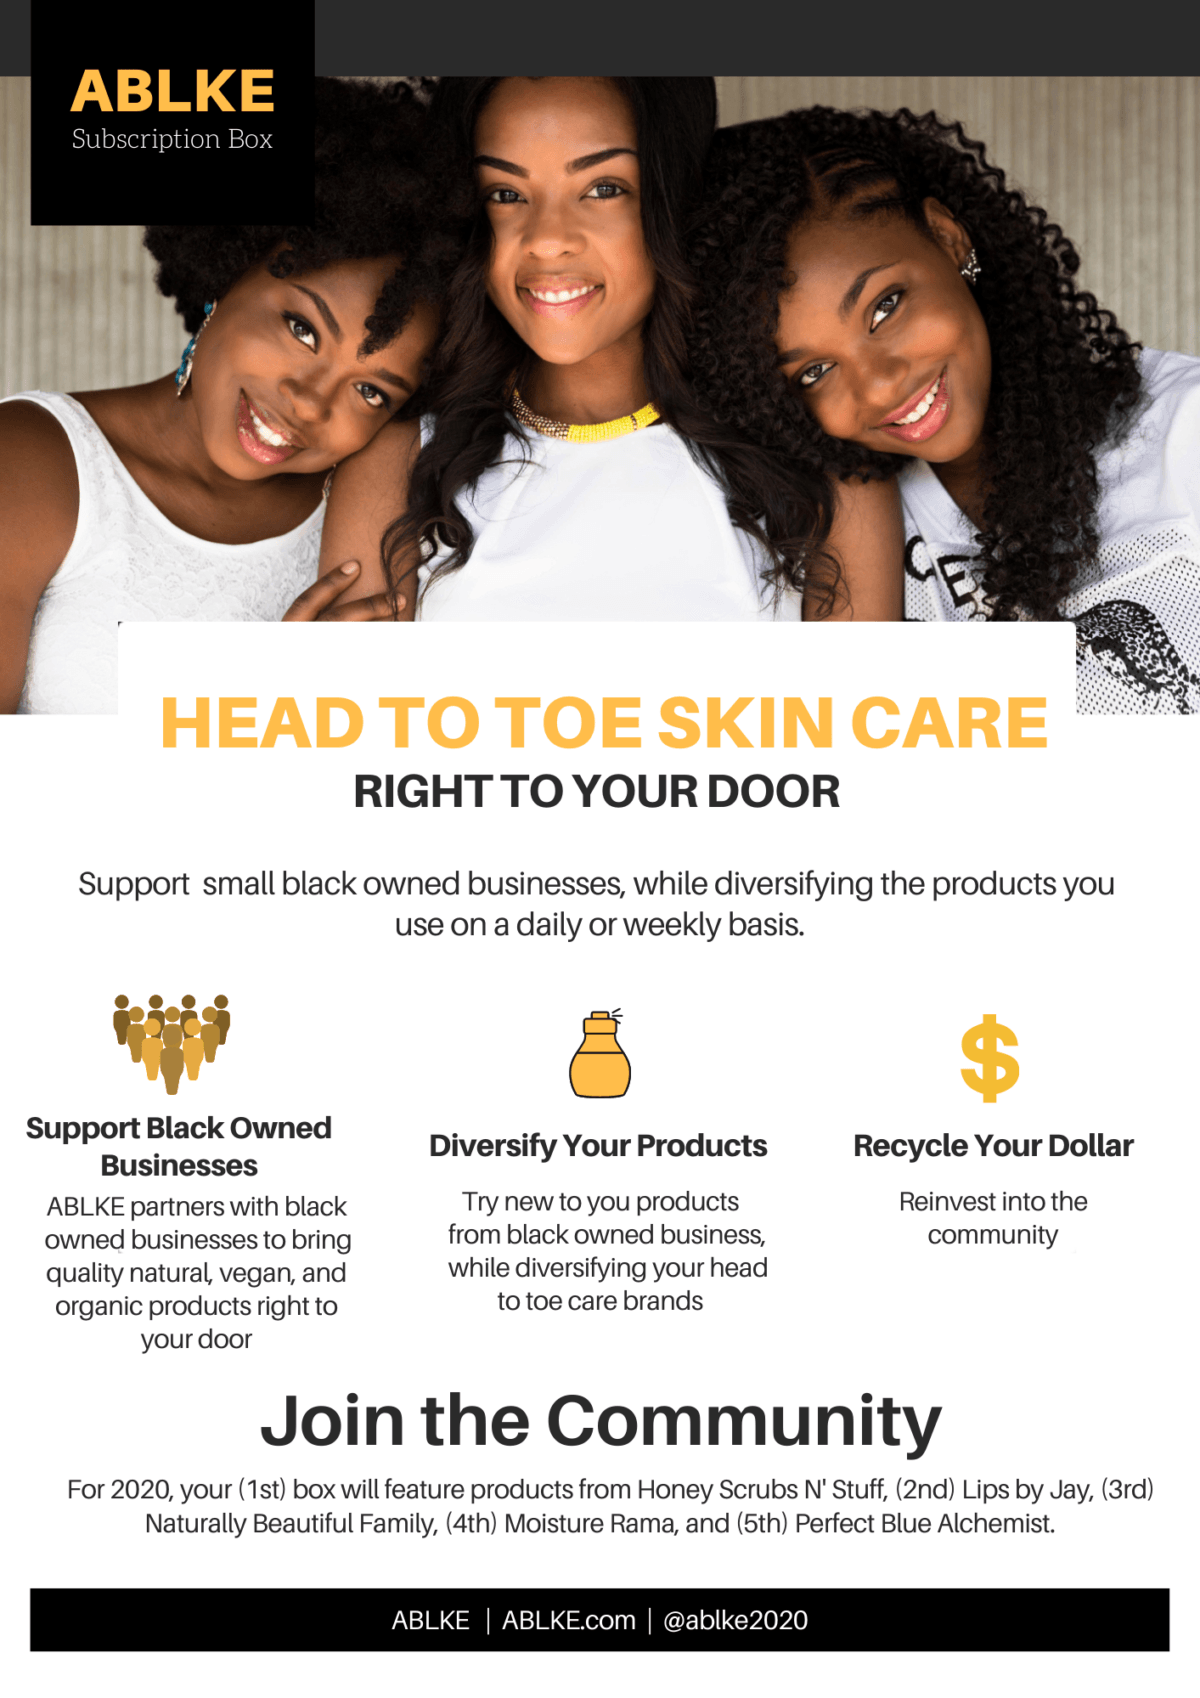 ABLKE-Black-Owned-subscription-box-head-to-toe-skin-care